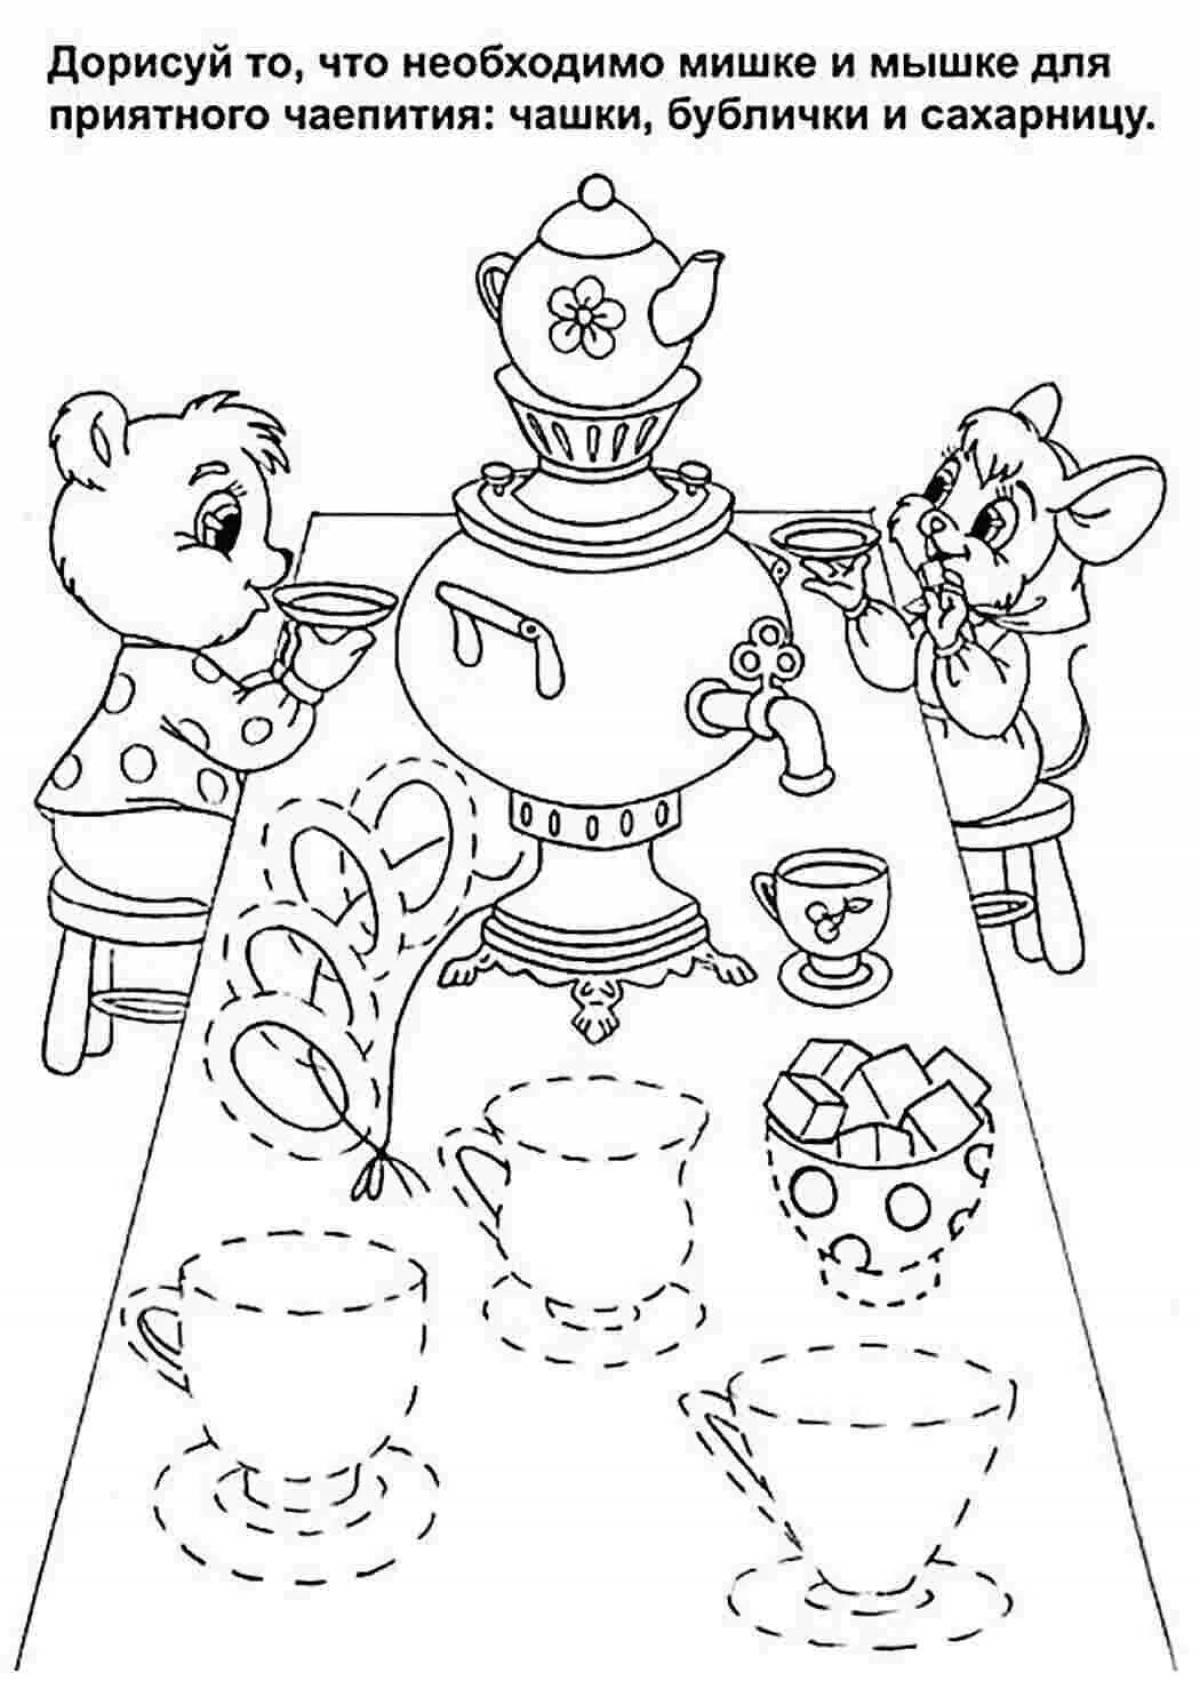 Exciting samovar coloring book for children 5-6 years old